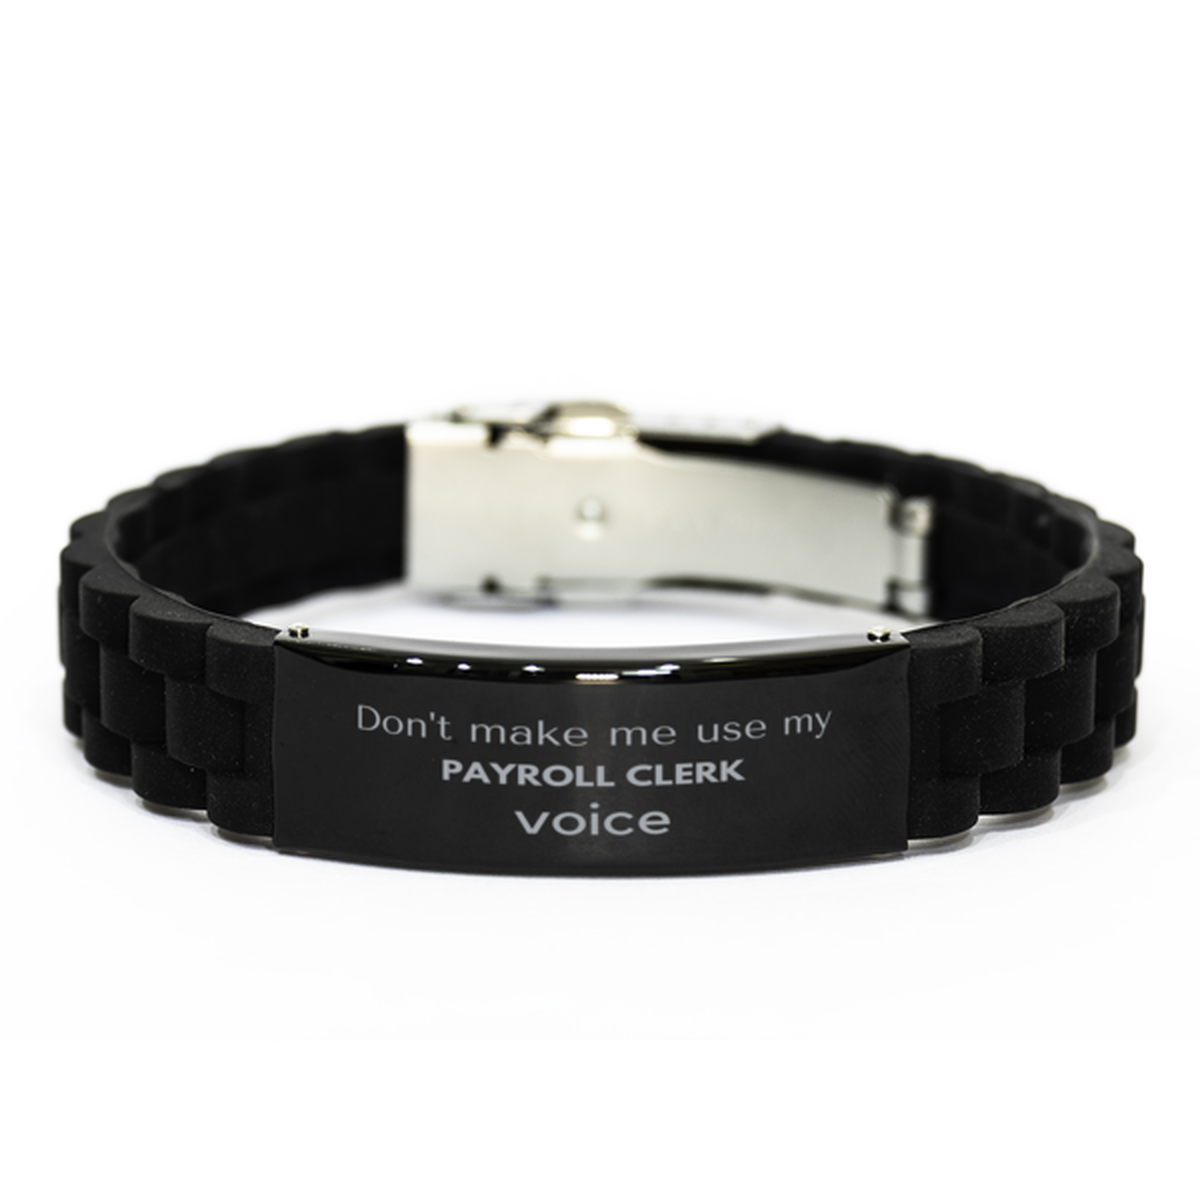 Don't make me use my Payroll Clerk voice, Sarcasm Payroll Clerk Gifts, Christmas Payroll Clerk Black Glidelock Clasp Bracelet Birthday Unique Gifts For Payroll Clerk Coworkers, Men, Women, Colleague, Friends